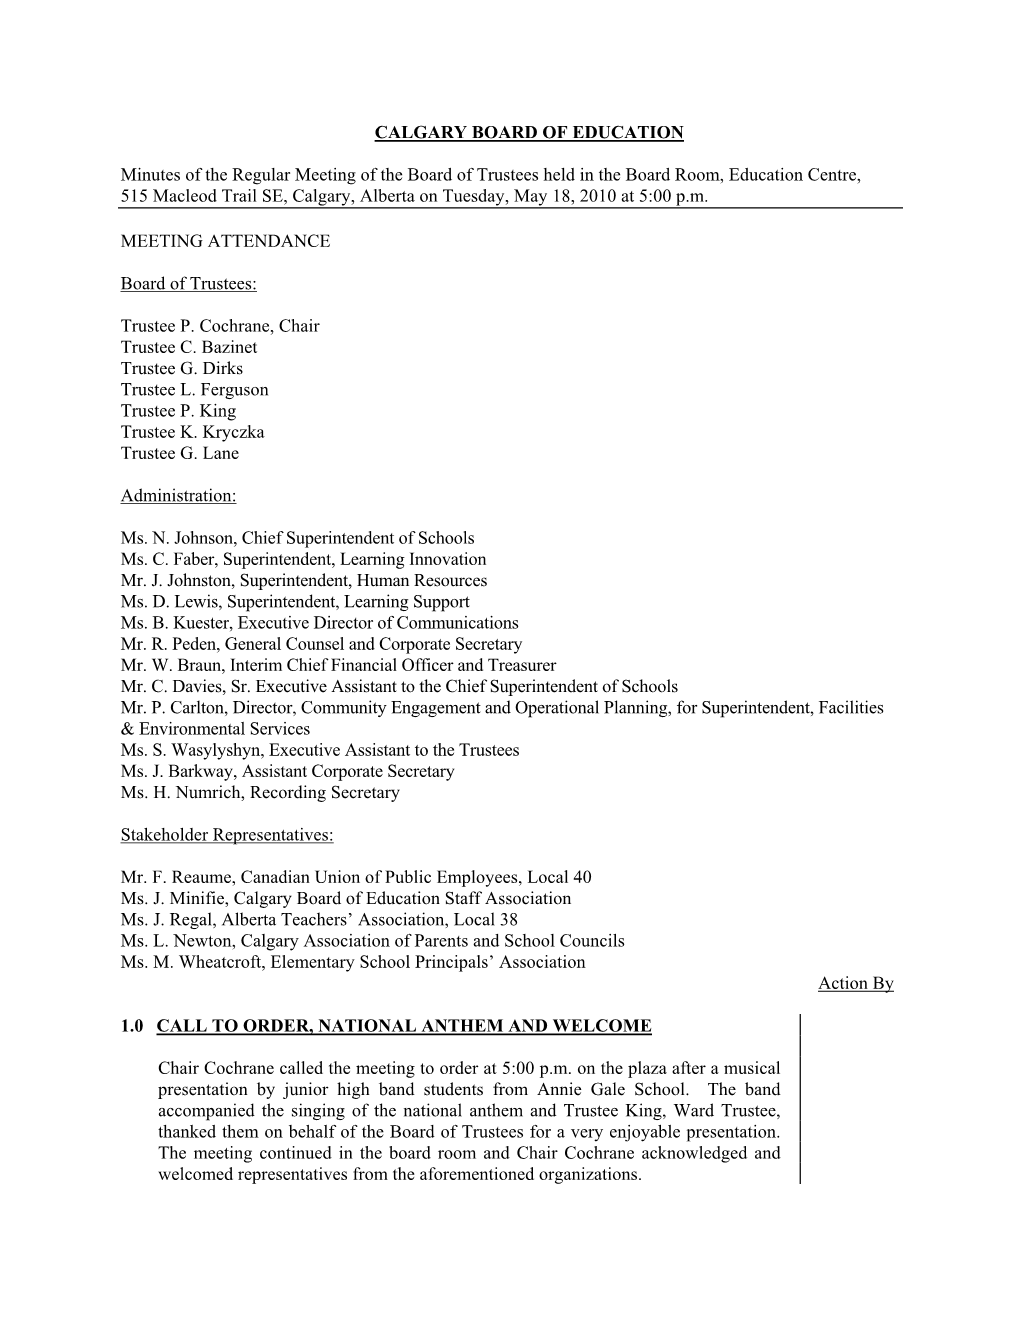 CALGARY BOARD of EDUCATION Minutes of the Regular Meeting Of